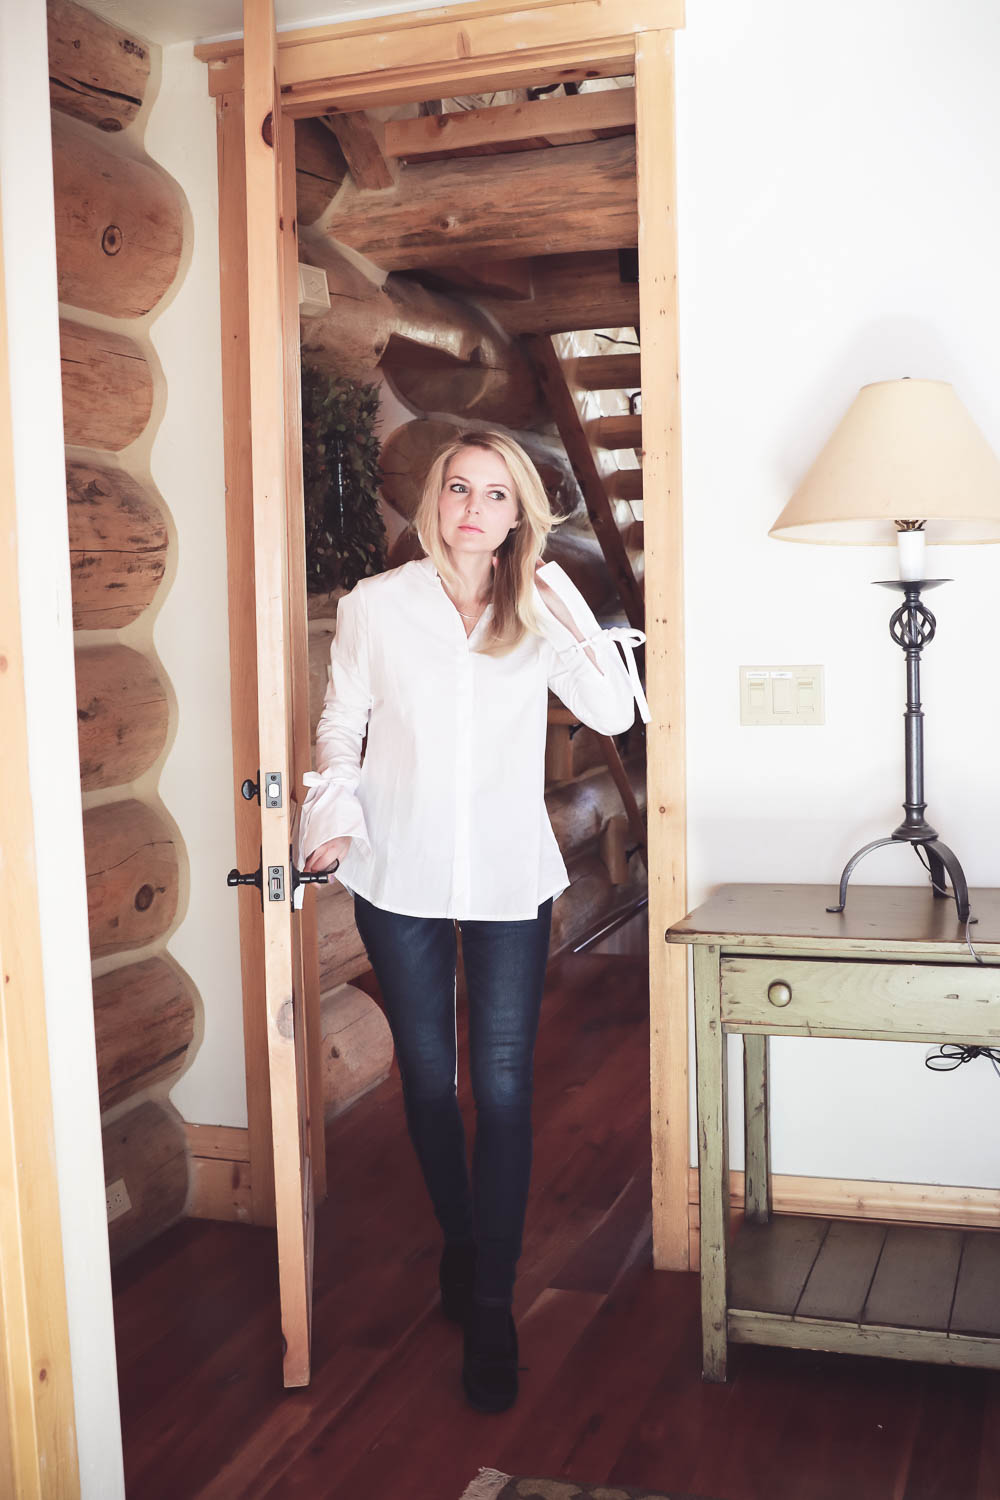 Laceup top by MLM in white button down poplin worn by Erin Busbee, fashion blogger and youtuber based in San Antonio, Texas. The laceup detail is a big fashion trend right now. Look for laceup pumps, flats, jeans, pants, tops, sweaters and jackets!